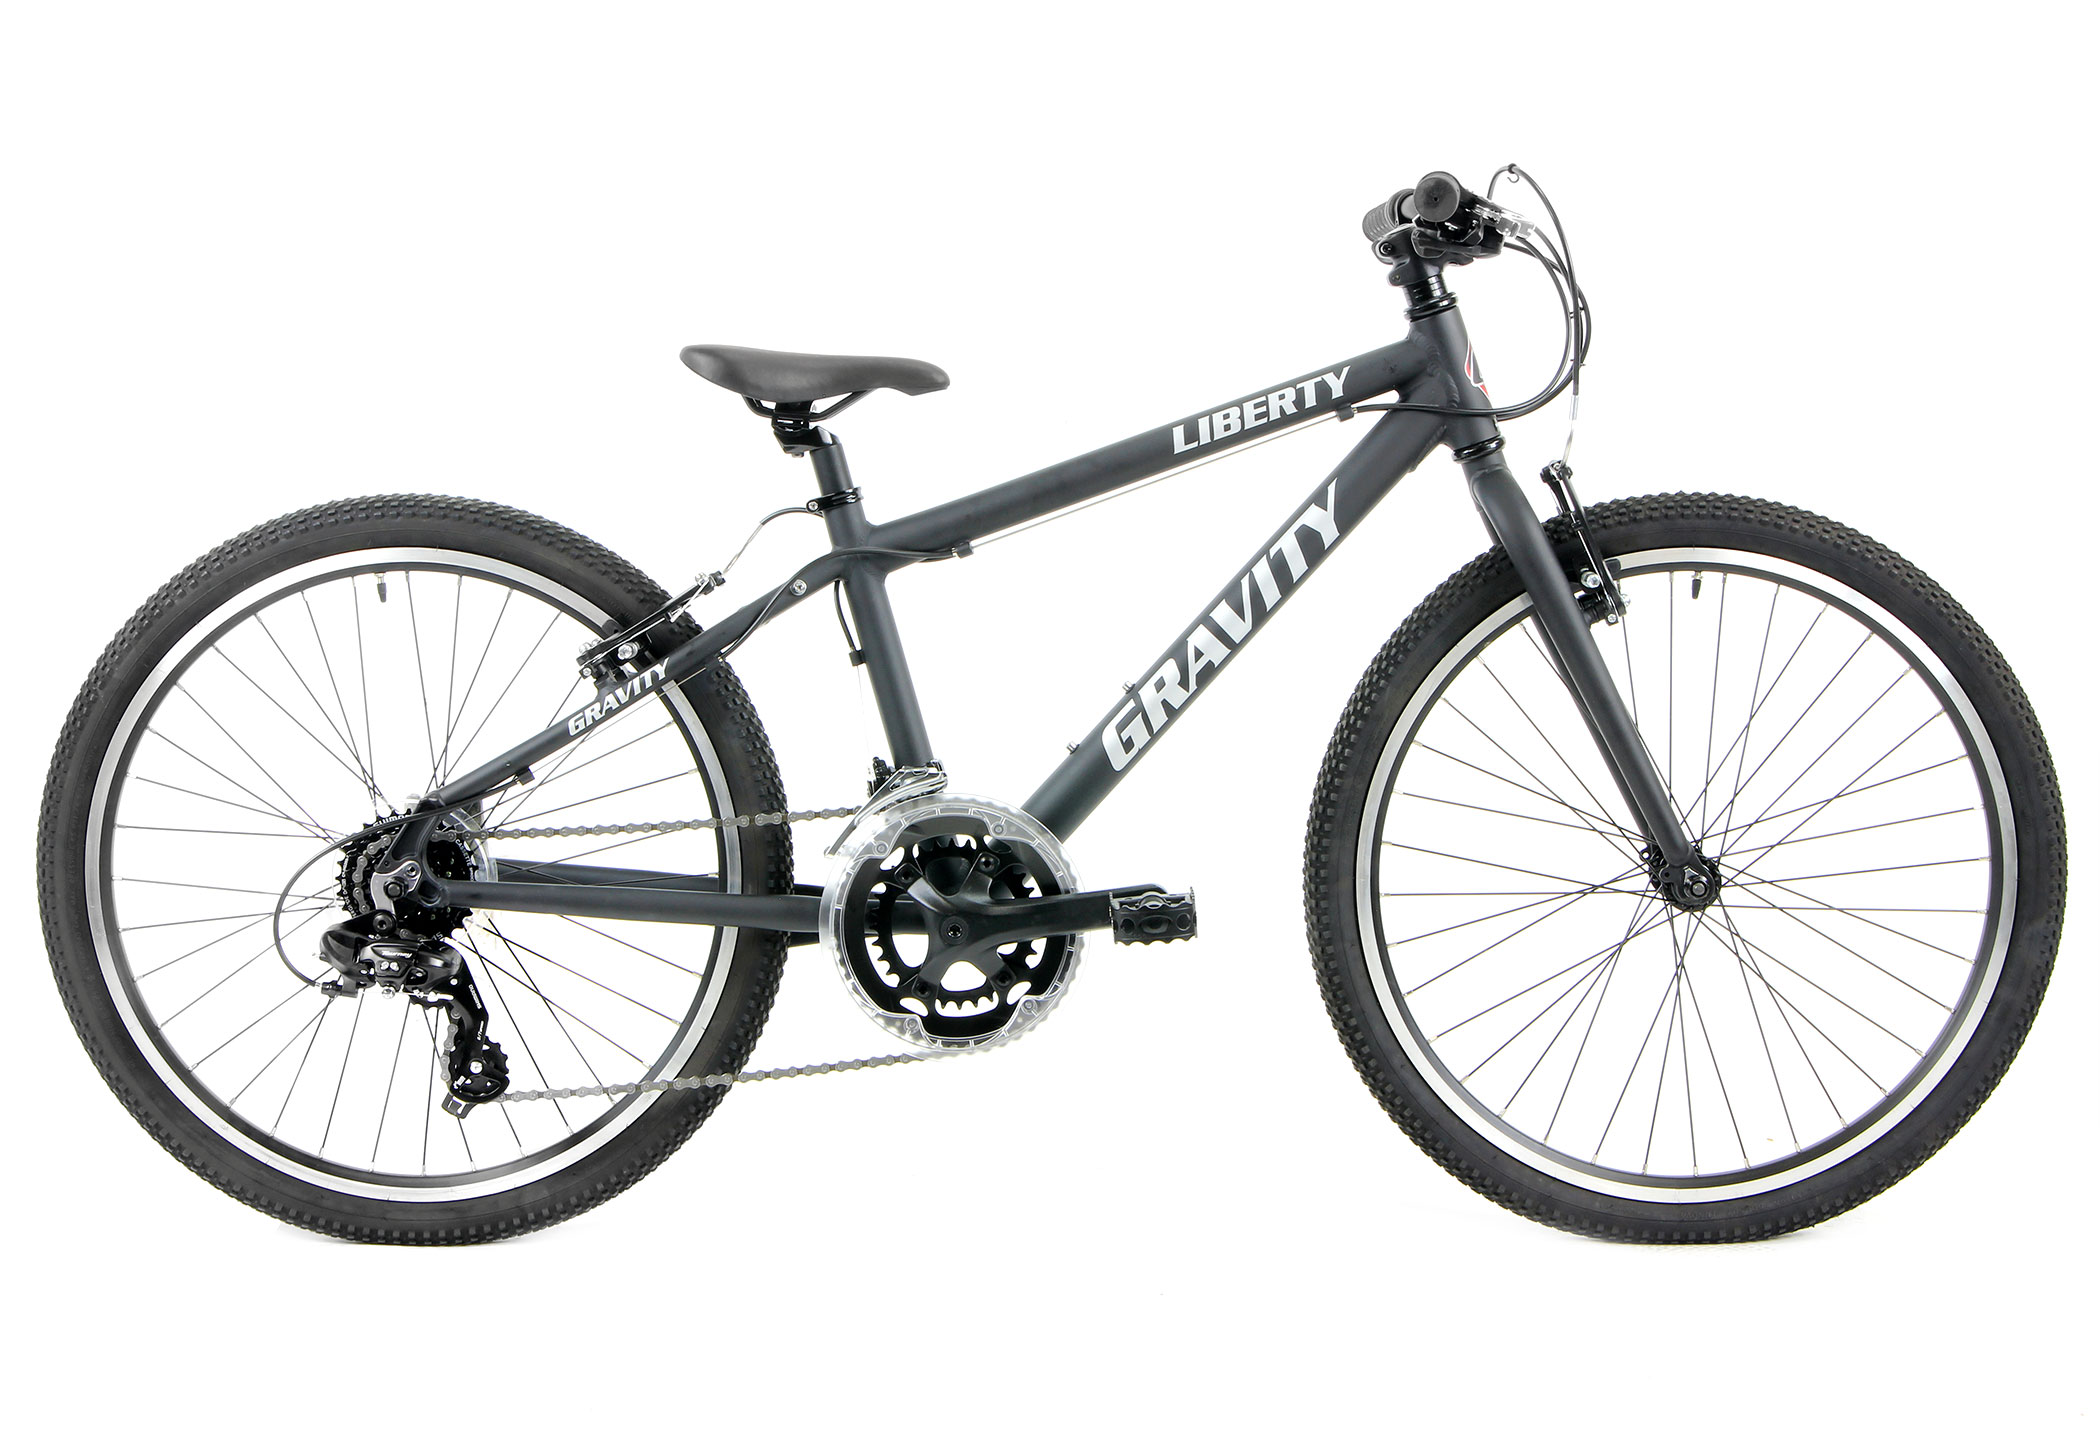 Bikes Gravity Liberty GRV Shimano 2X7 Speed Flat Bars Gravel/Adventure/Road Bikes for Lil' Riders and  Image